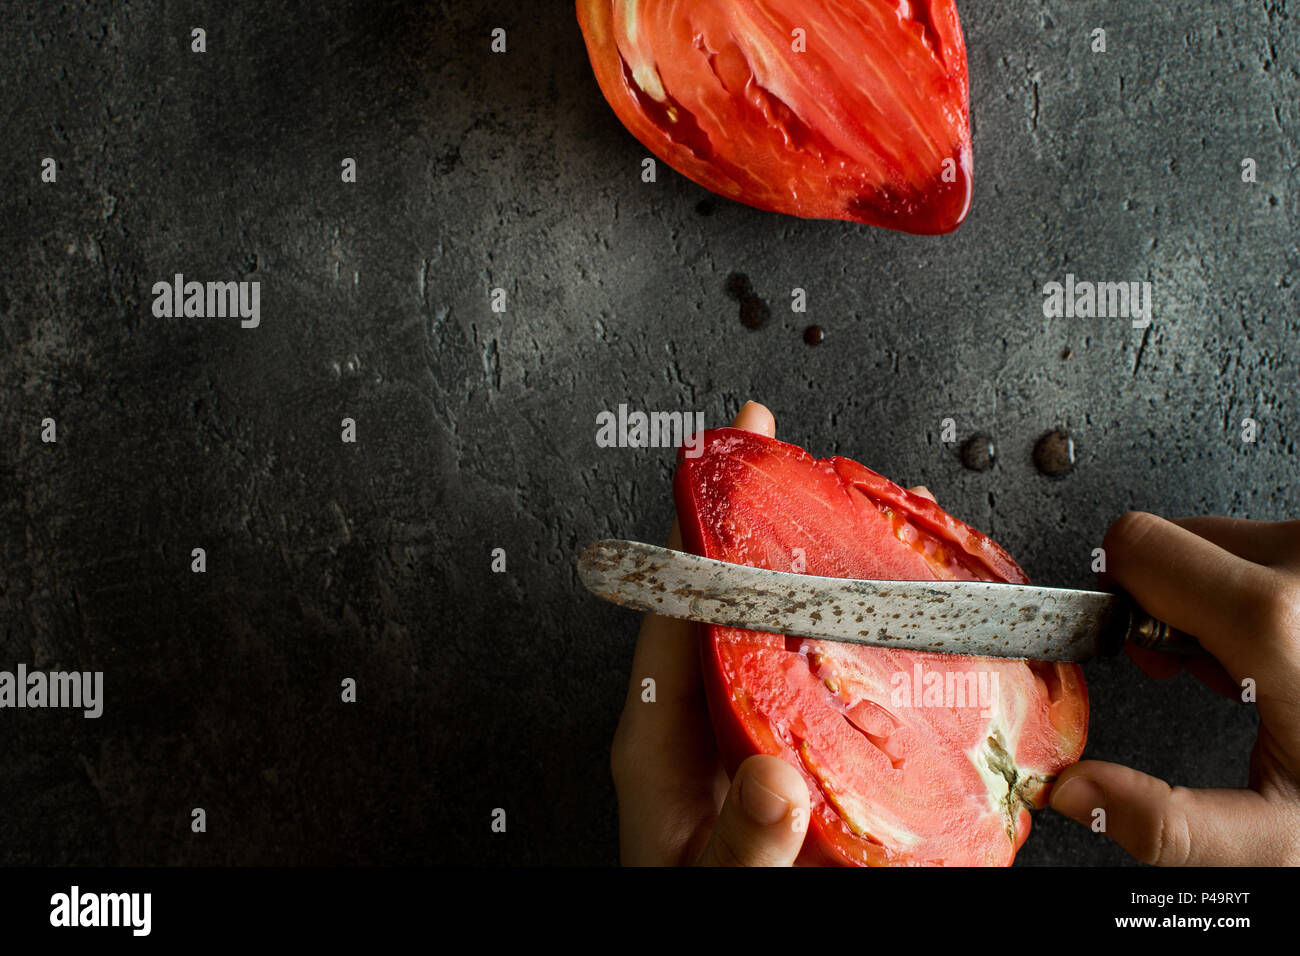 Female Hands Cut Organic Bull's Heart Heirloom Tomato. Superfood Healthy Eating Concept. Stock Photo